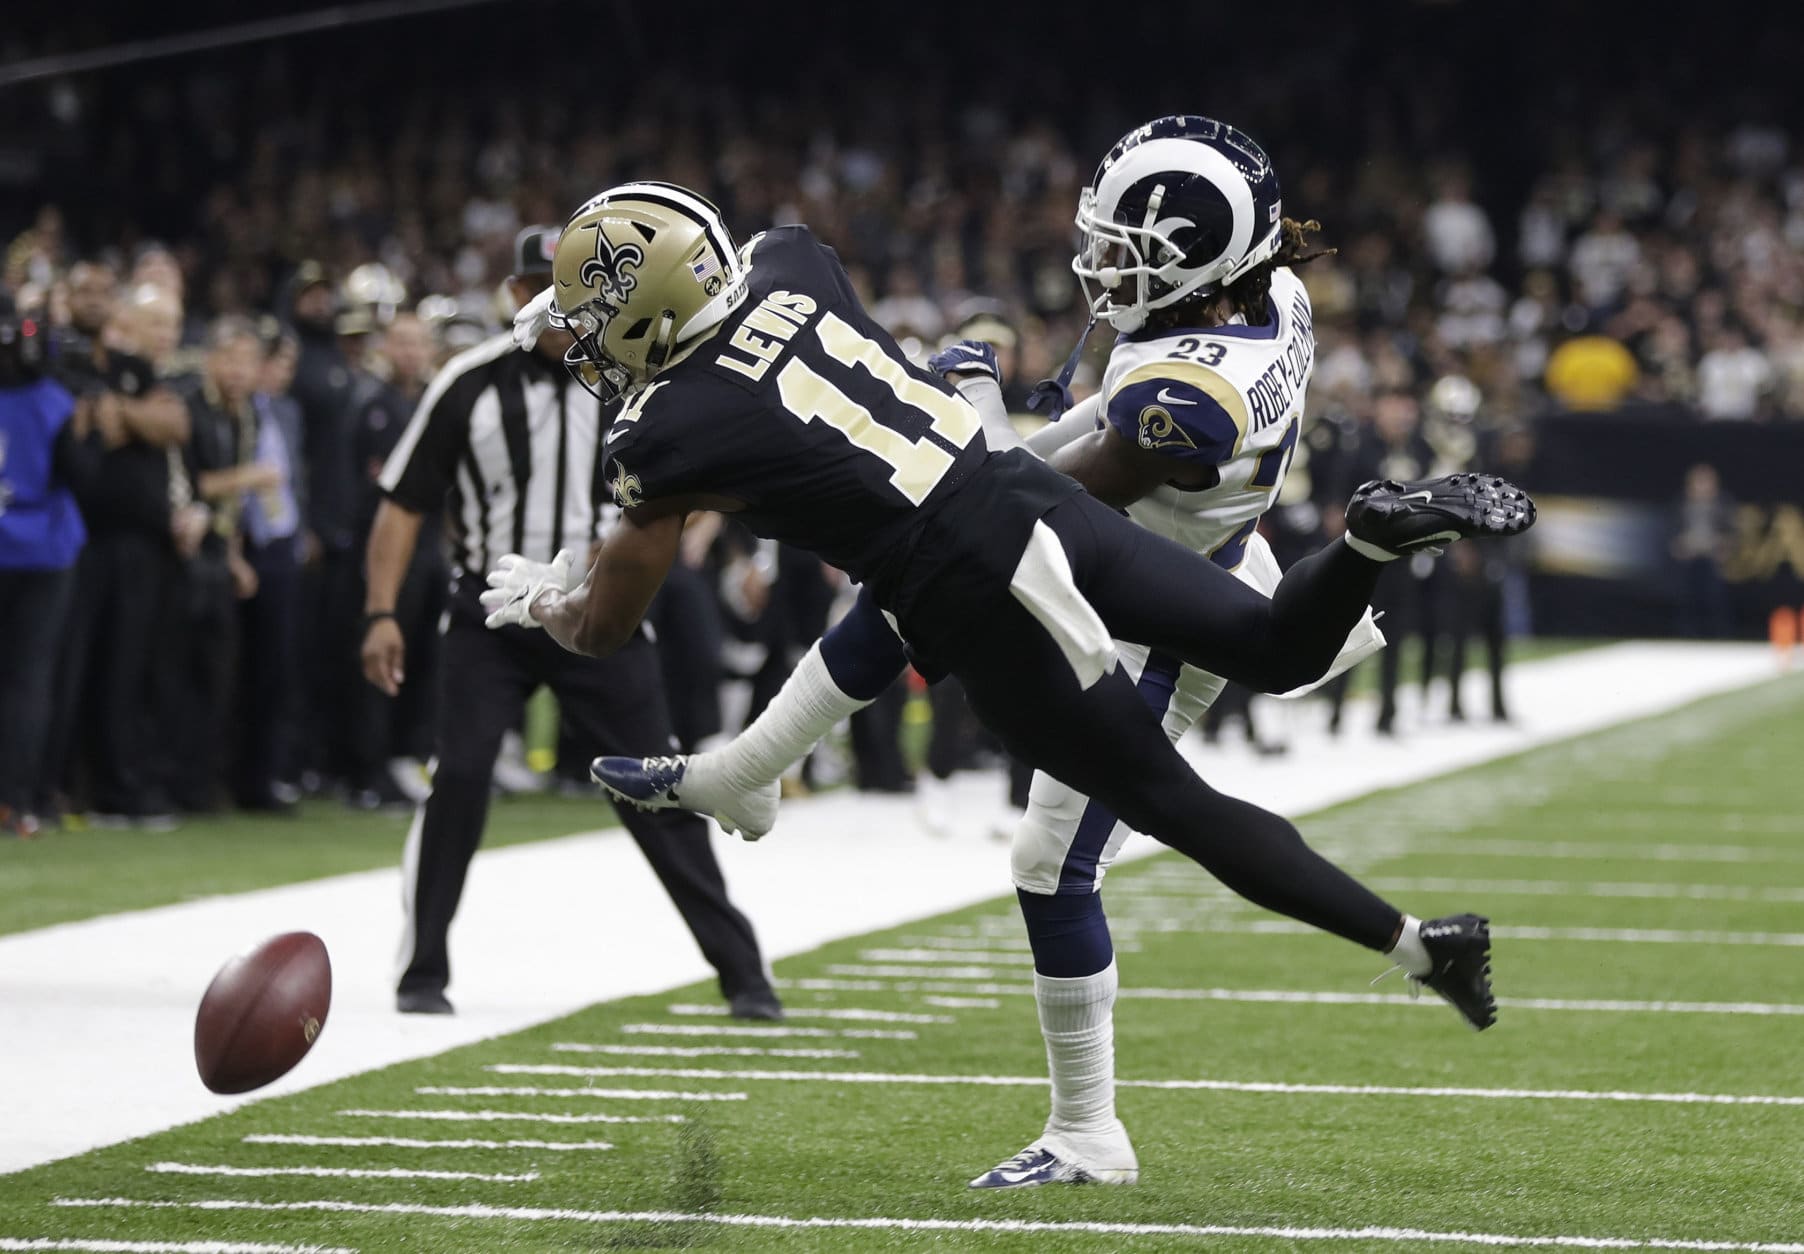 New Orleans Saints wide receiver Tommylee Lewis (11) works for a coach against Los Angeles Rams defensive back Nickell Robey-Coleman (23) during the second half the NFL football NFC championship game Sunday, Jan. 20, 2019, in New Orleans. The Rams won 26-23. (AP Photo/Gerald Herbert)